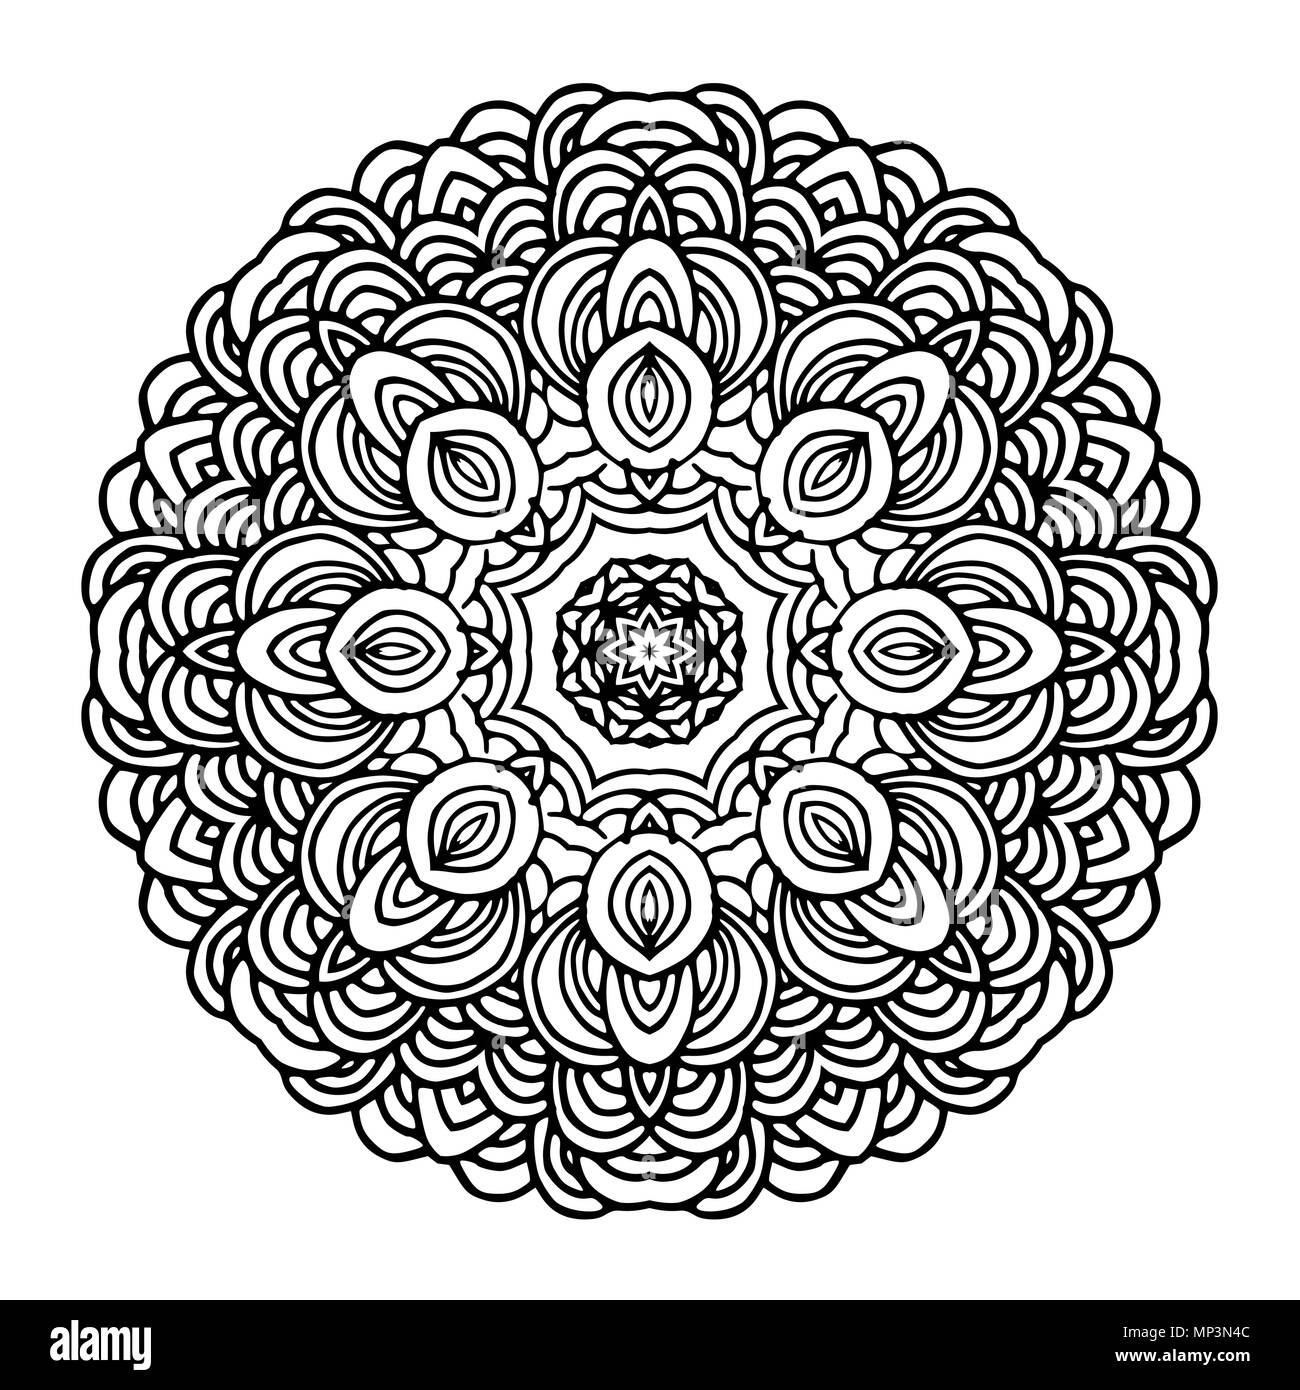 Hand drawn mandala template for design. Geometric circle motif for design, invitation cards and elements for yoga symbol etc. Stock Vector